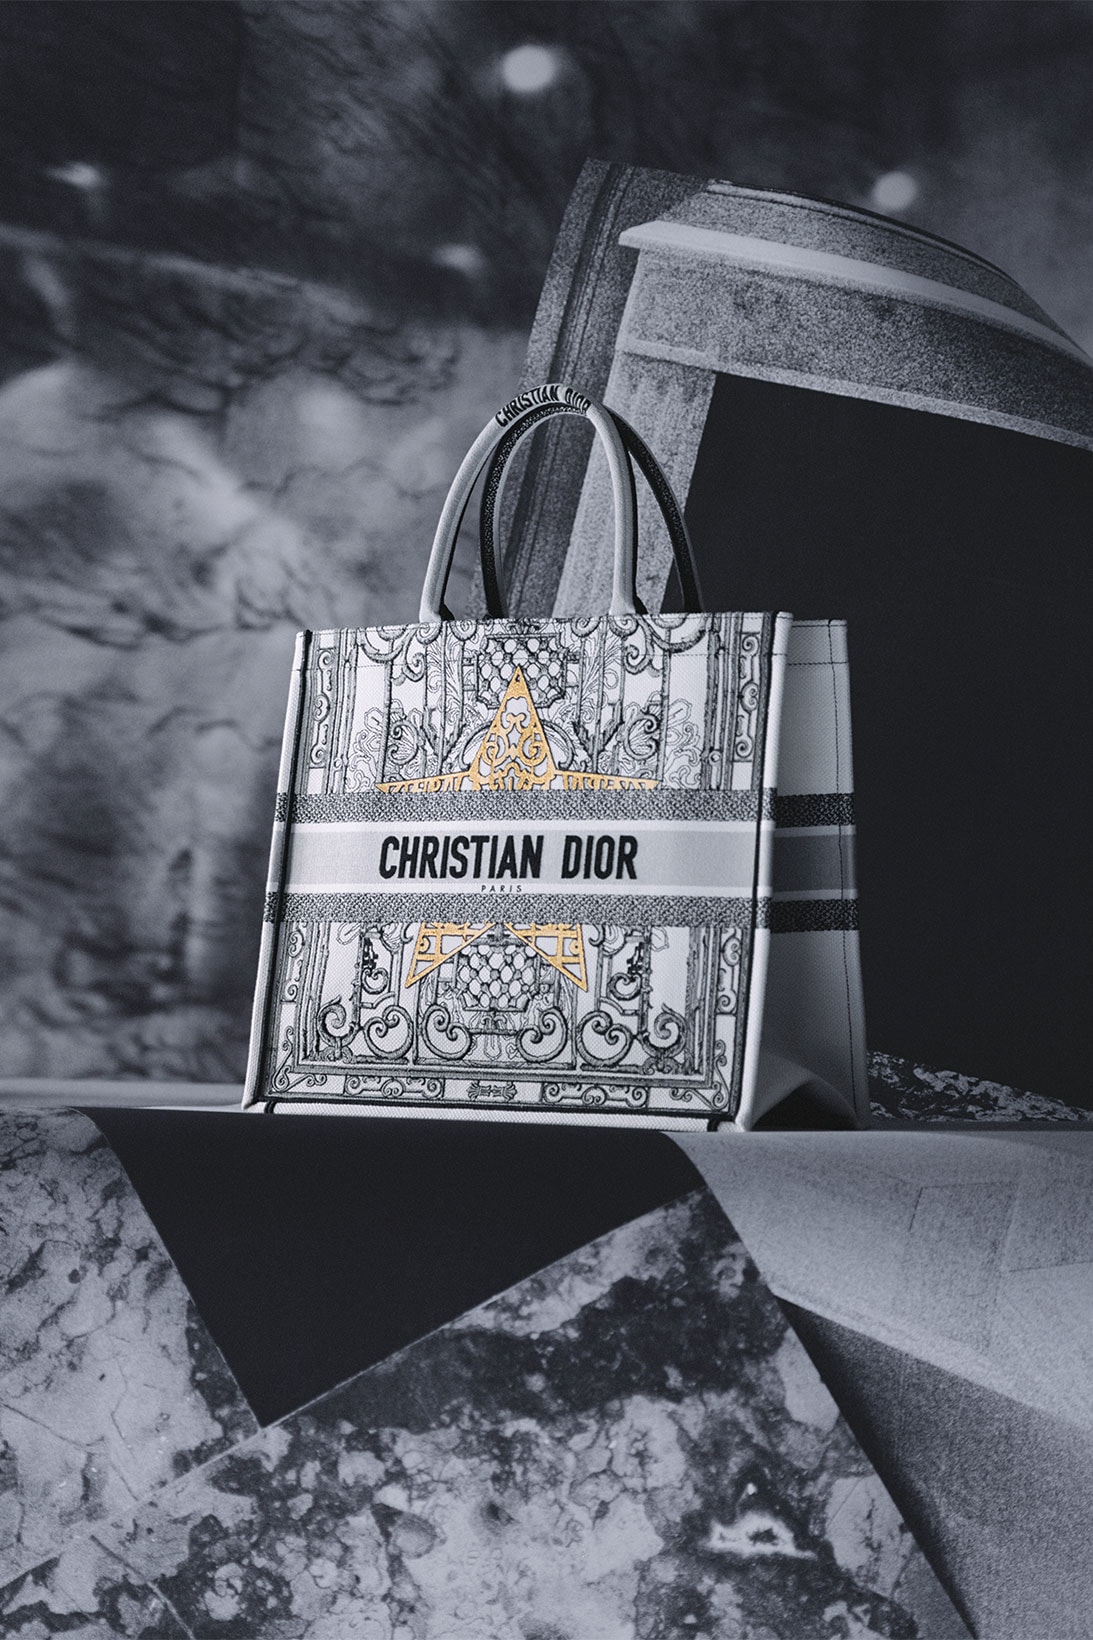 Dior hopes another 'icon' is in the bag with new 30 Montaigne